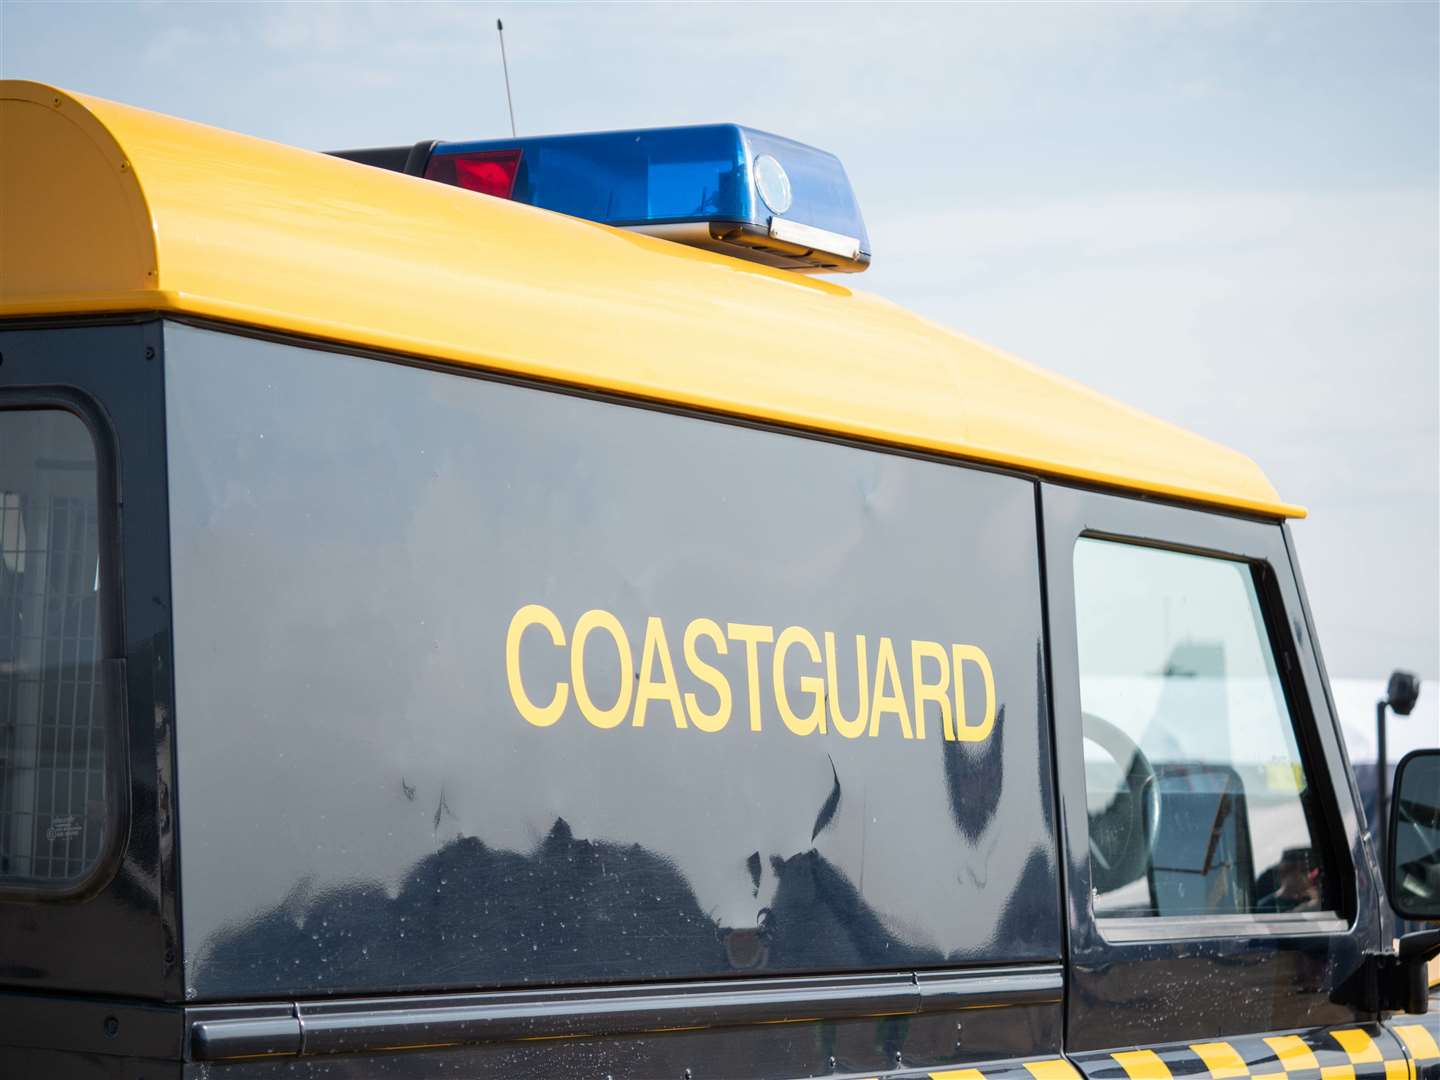 The pair were found at 12.30pm by Durness and Melness coastguard rescue teams.